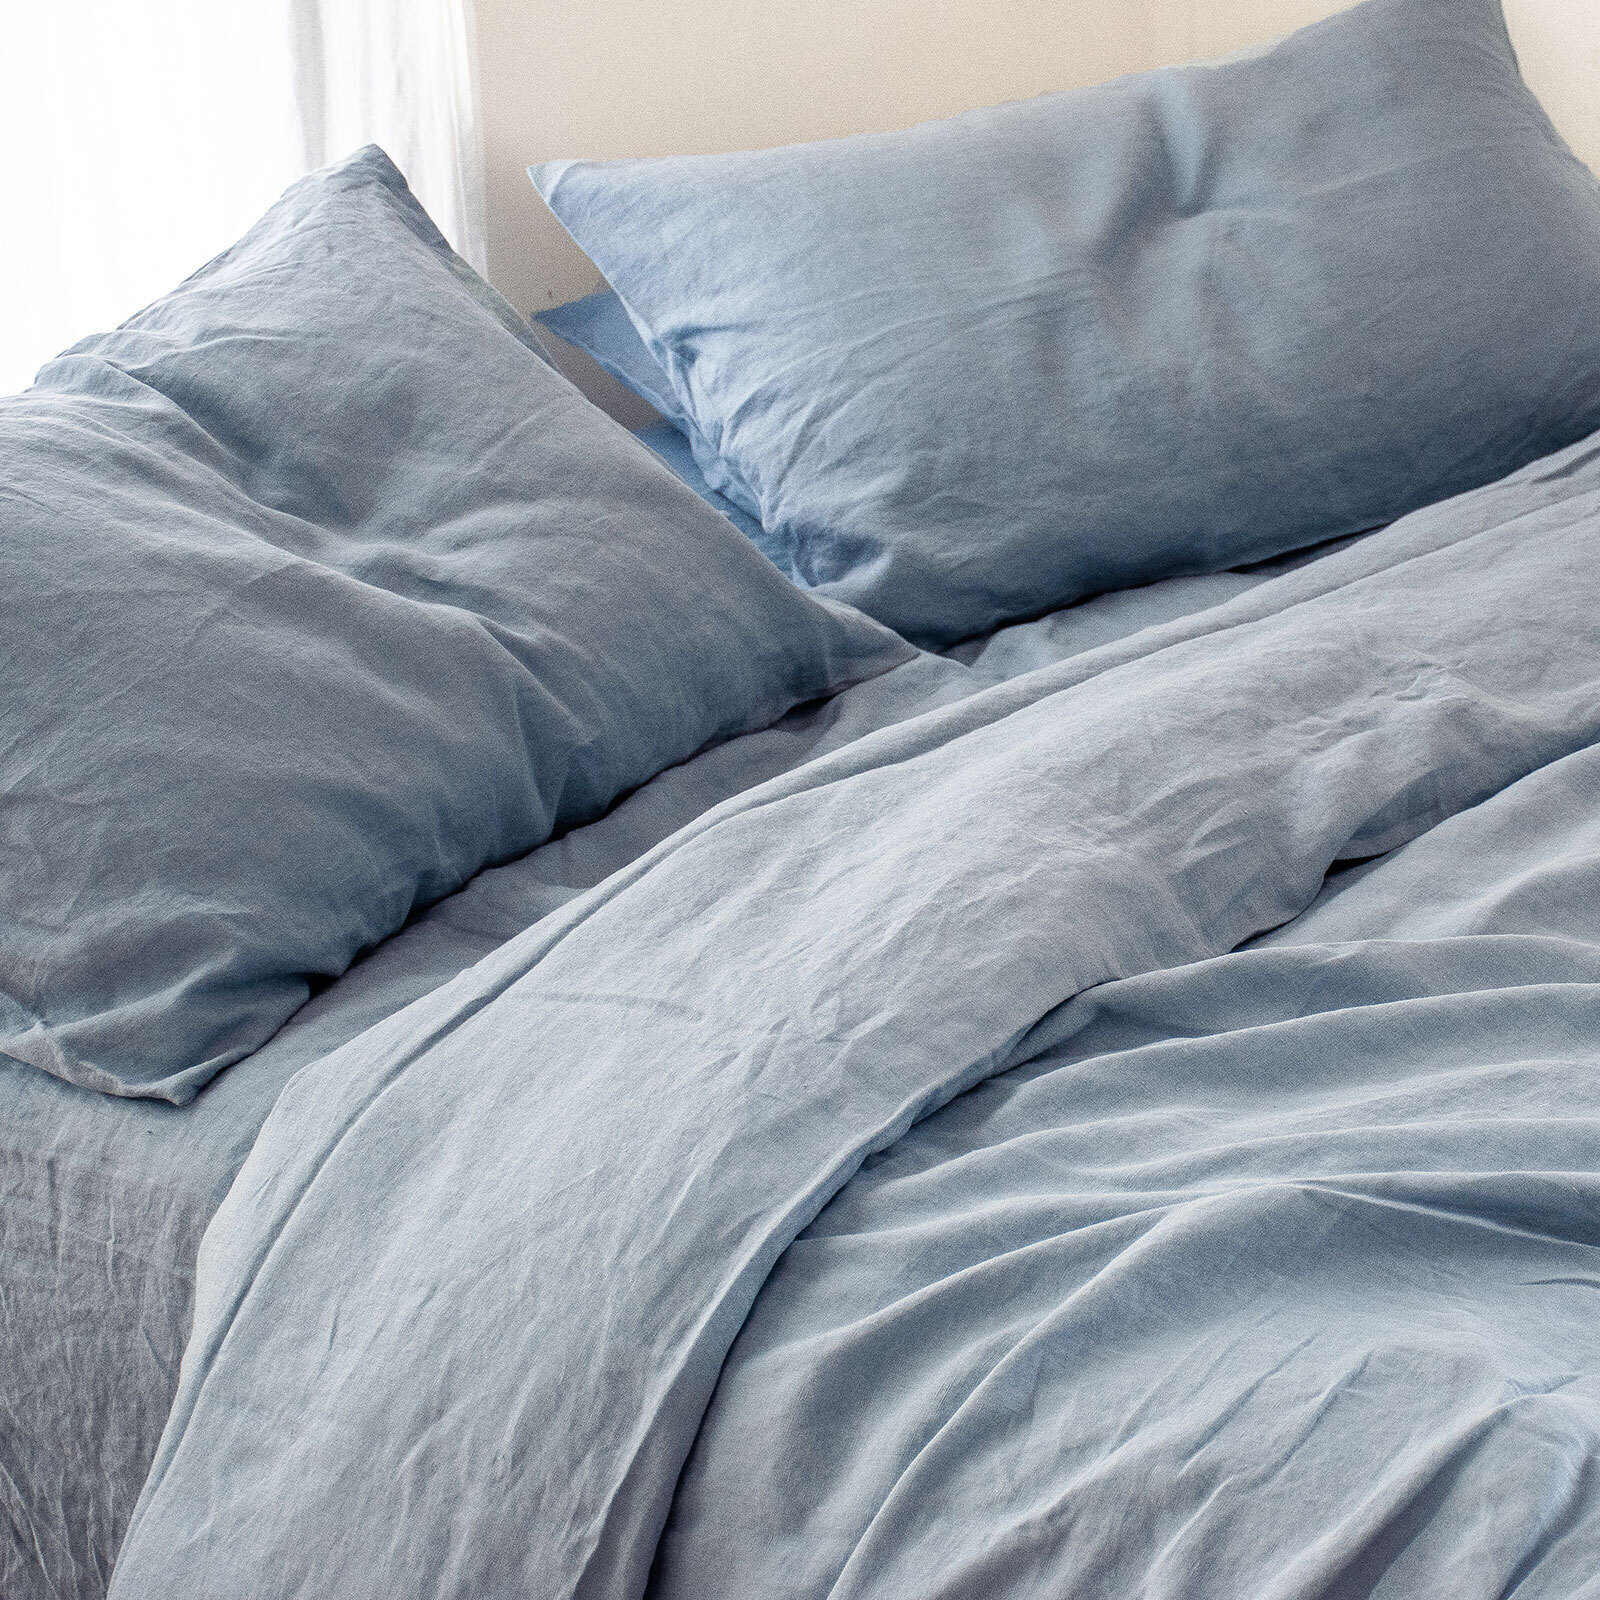 100% pure French linen Duvet Cover in Marine Blue